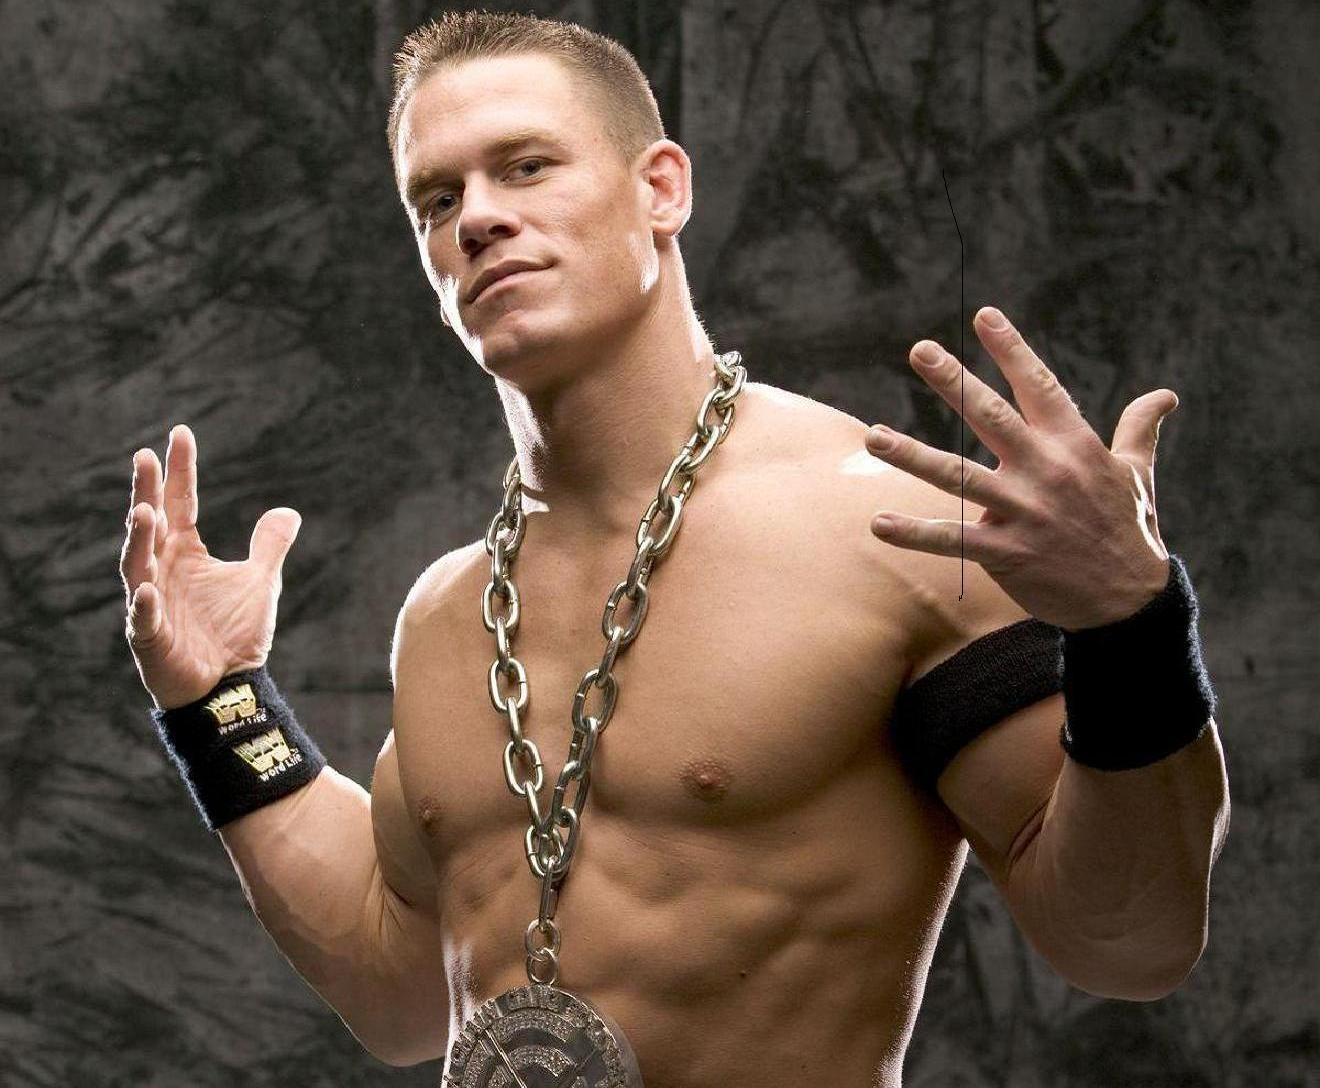 John Cena hottest Wallpaper 4. Posted by shumail at 7:00 PM